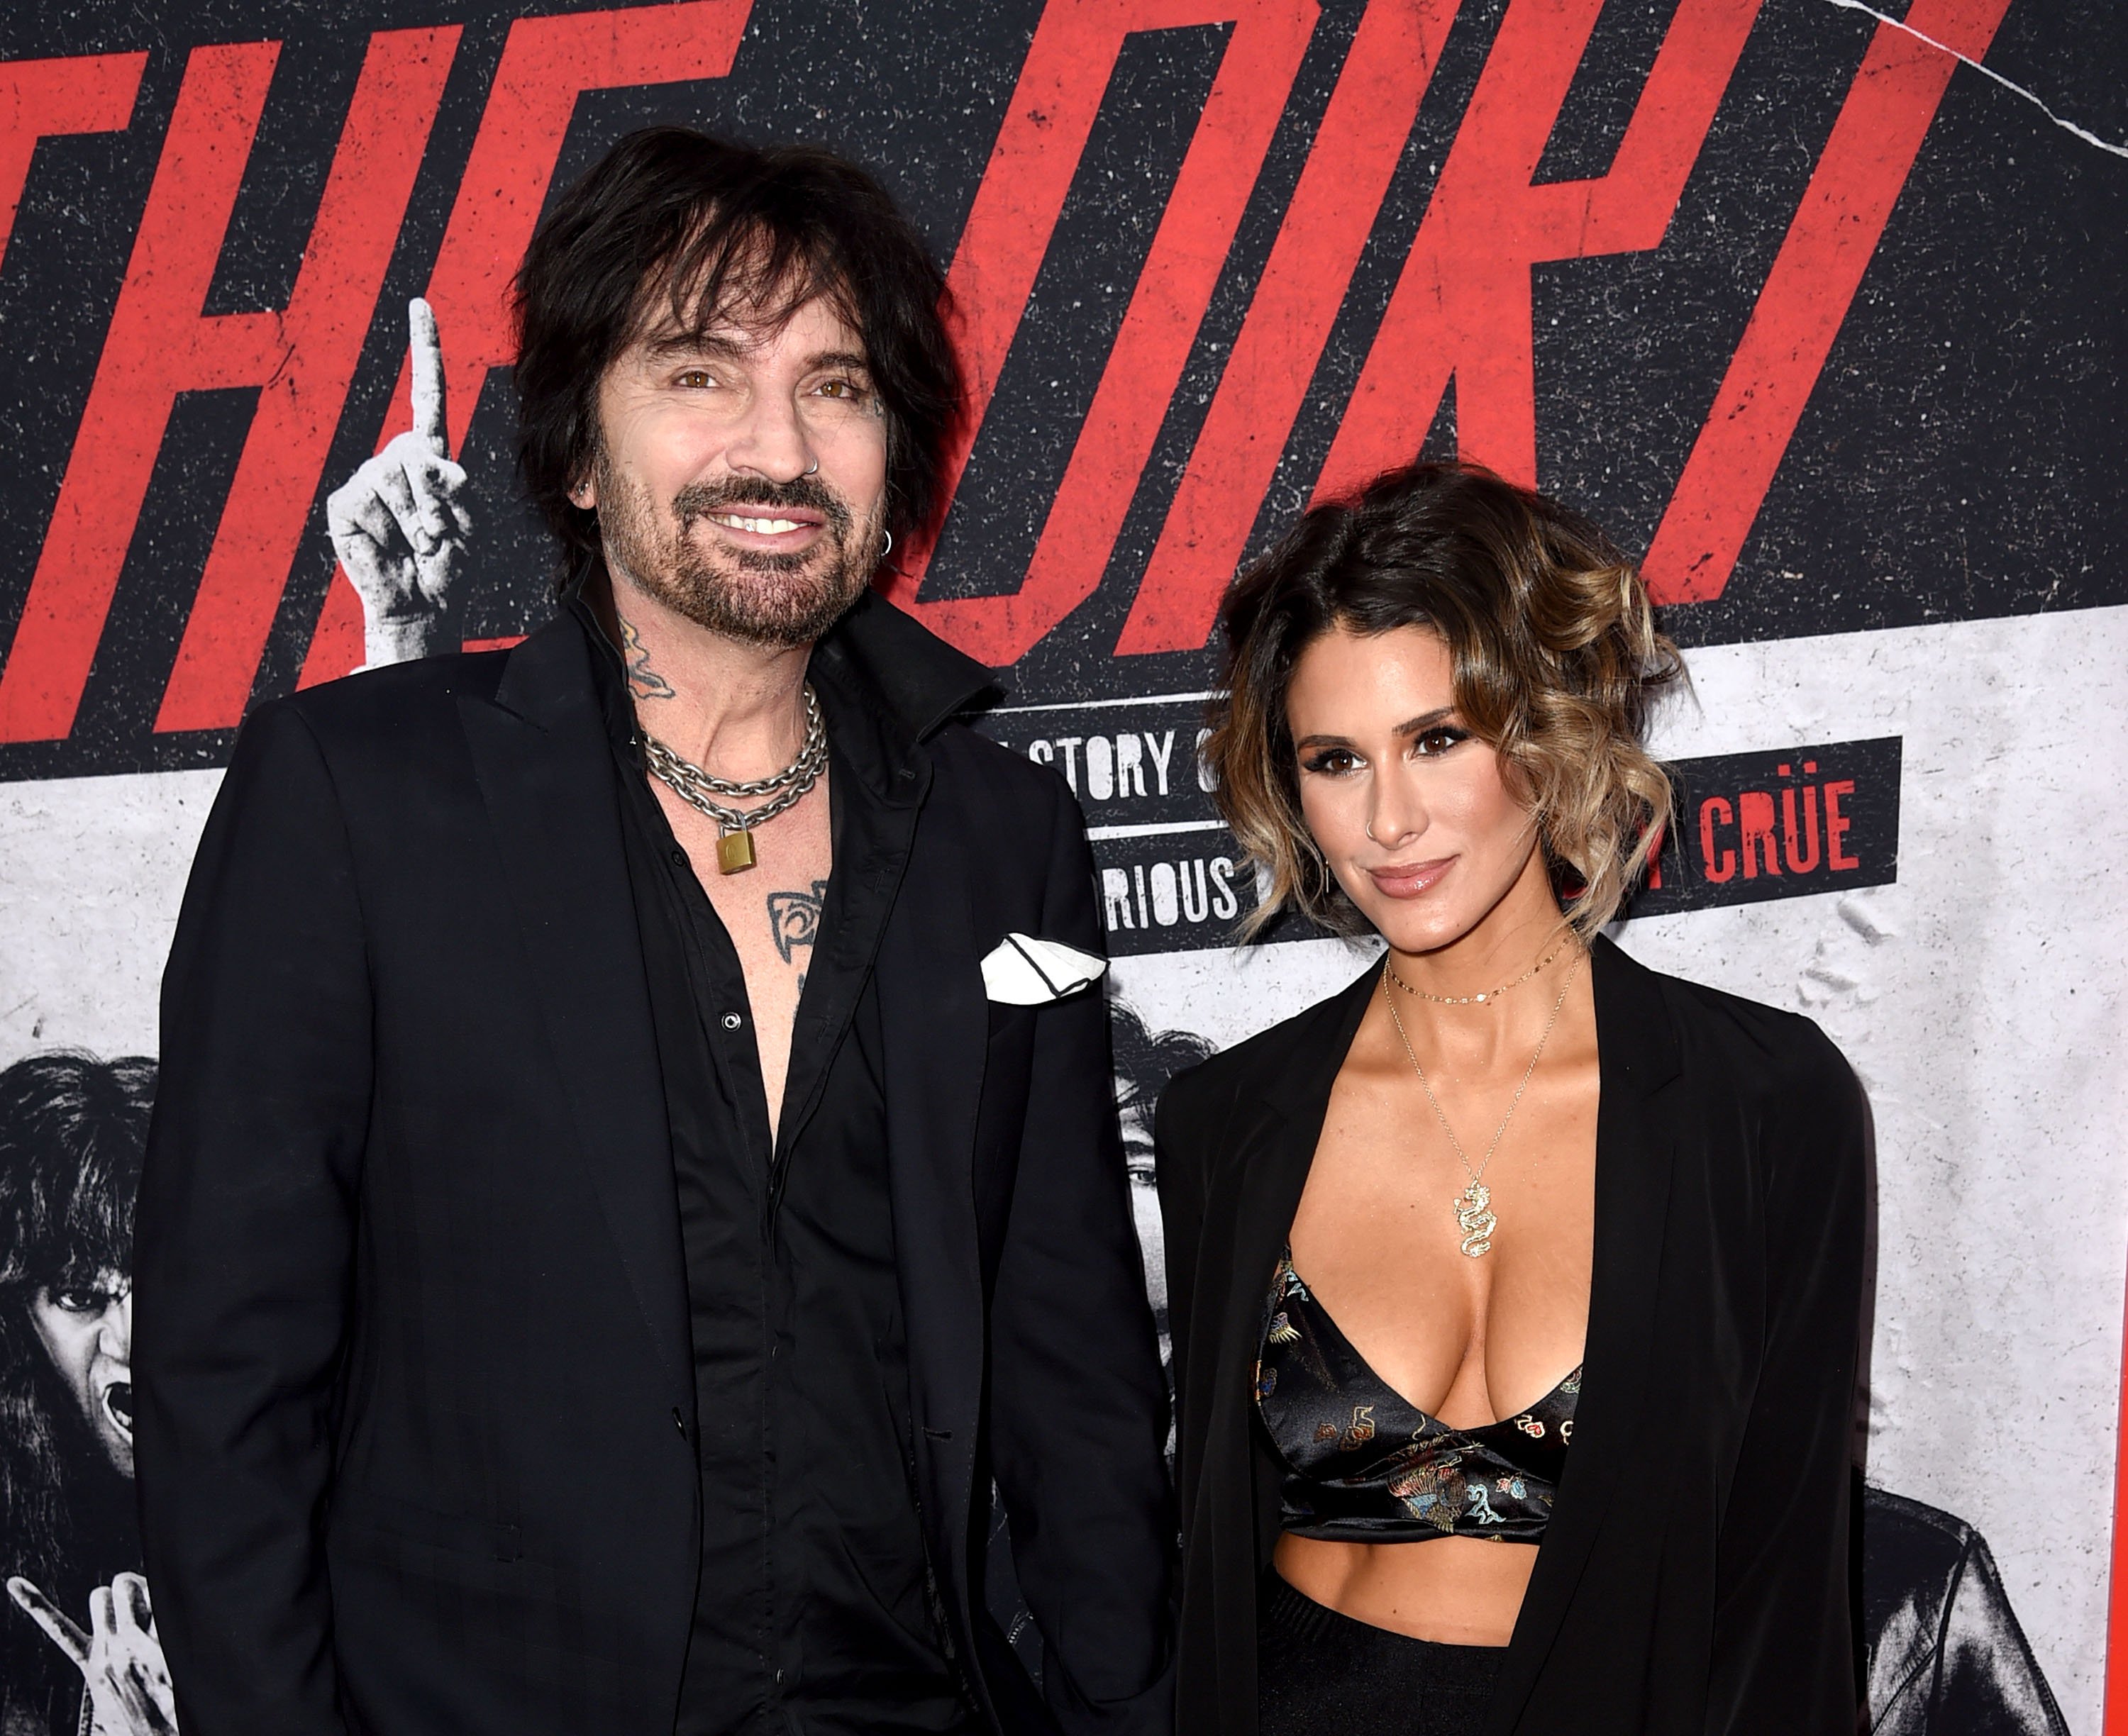 Tommy Lee, who recently shared a photo of his penis to Twitter, and his wife Brittany Furlan